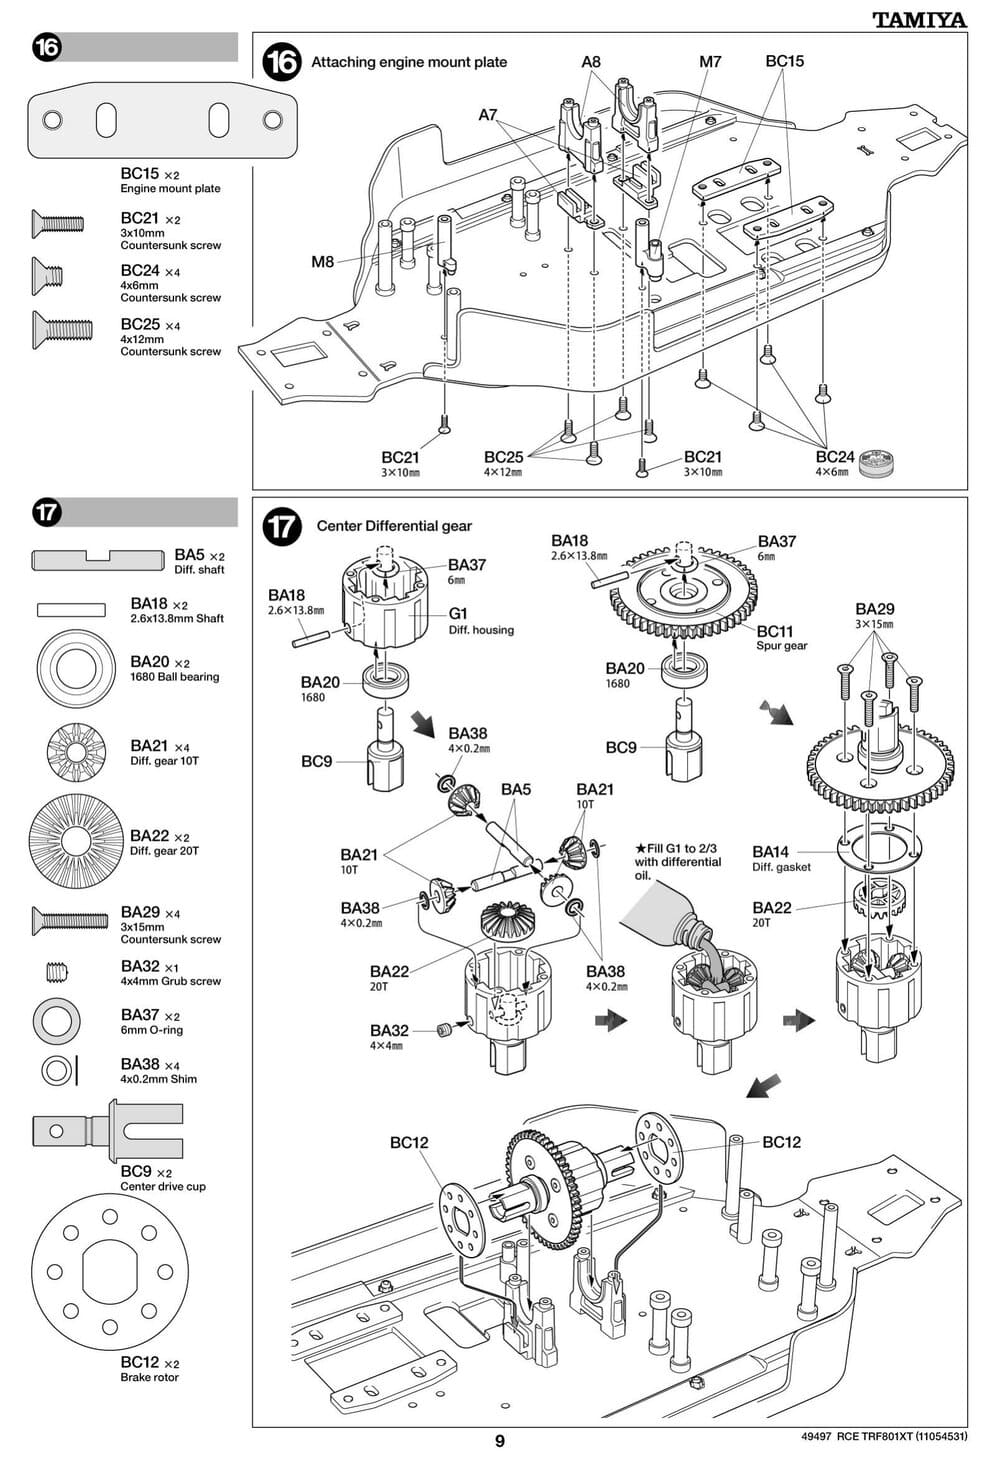 Tamiya - TRF801Xt Performance Package Version Chassis - Manual - Page 9